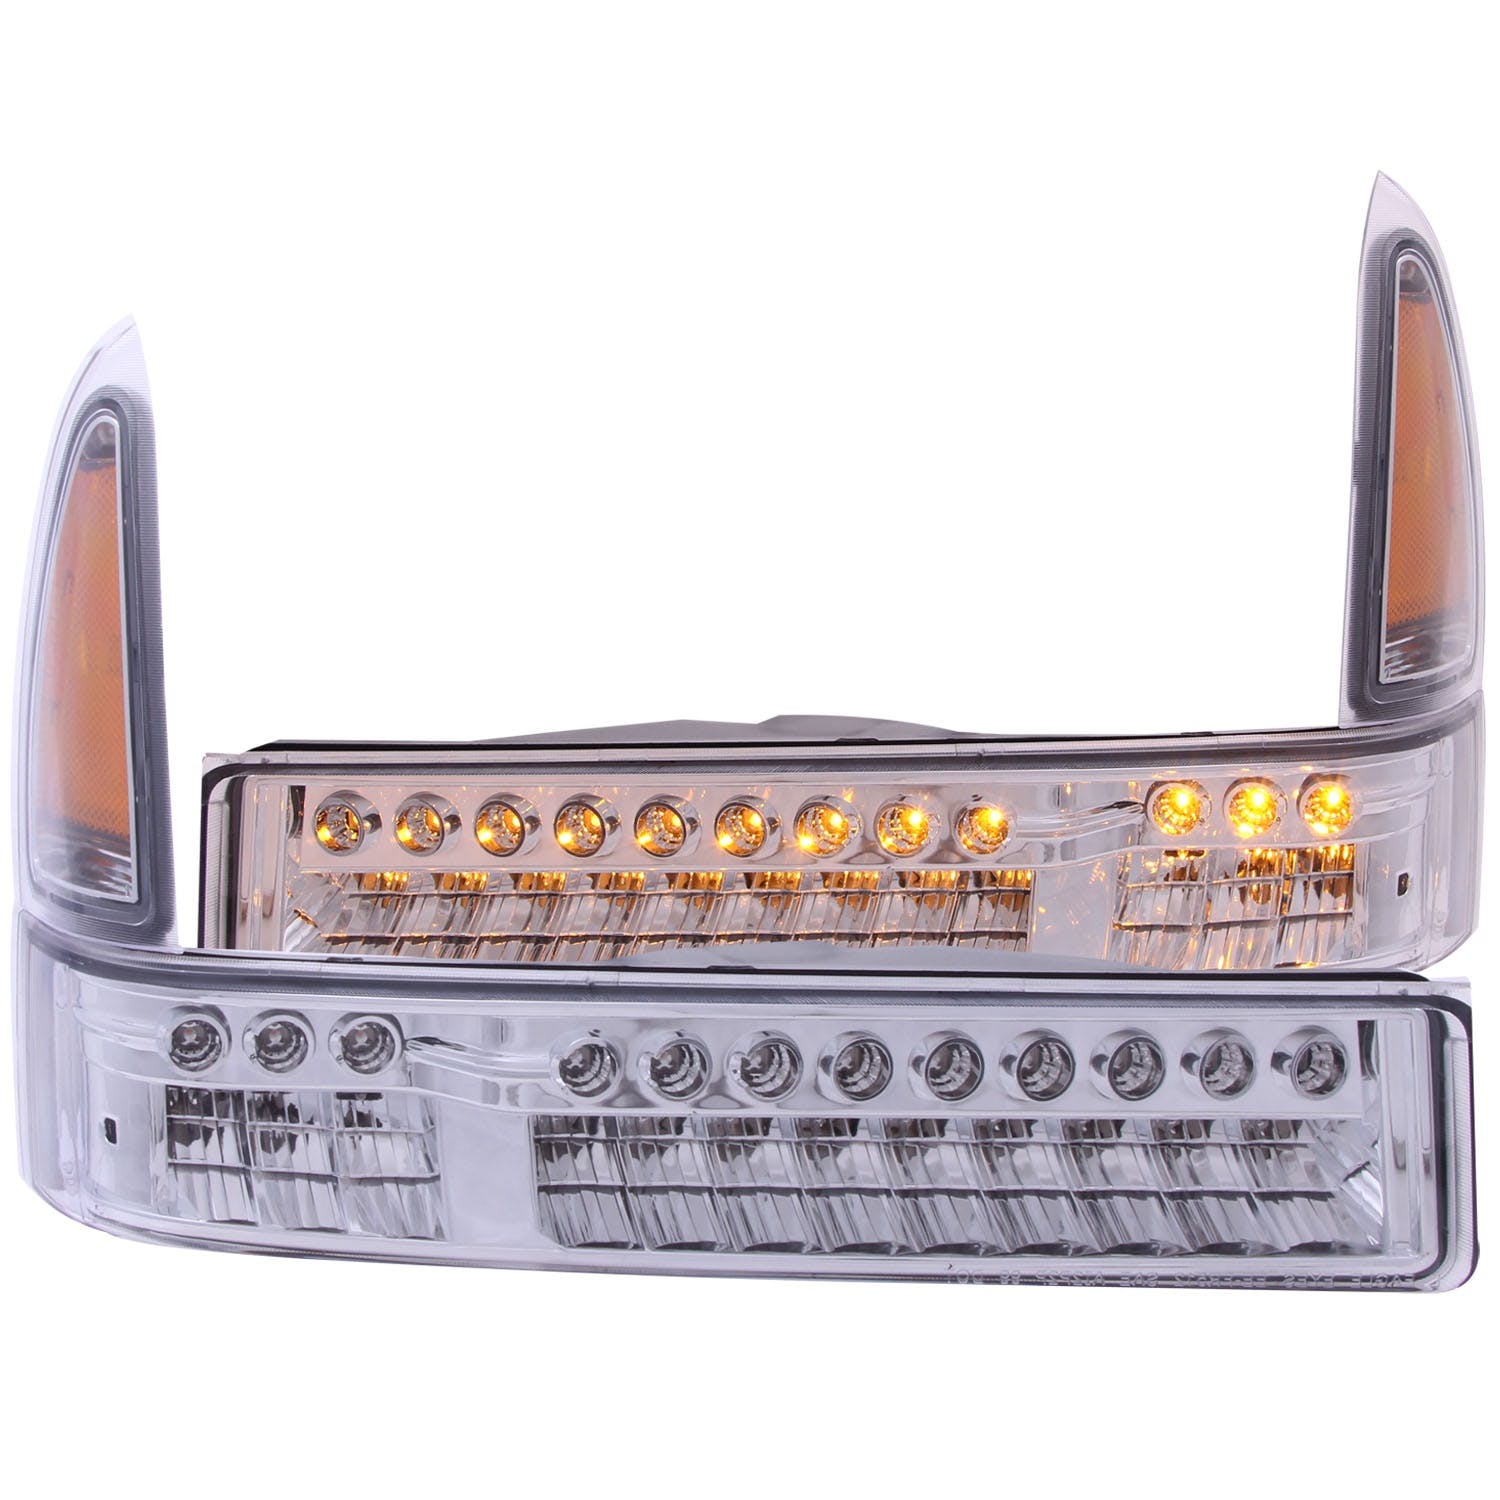 AnzoUSA 511056 LED Parking Lights Chrome with Amber Reflector